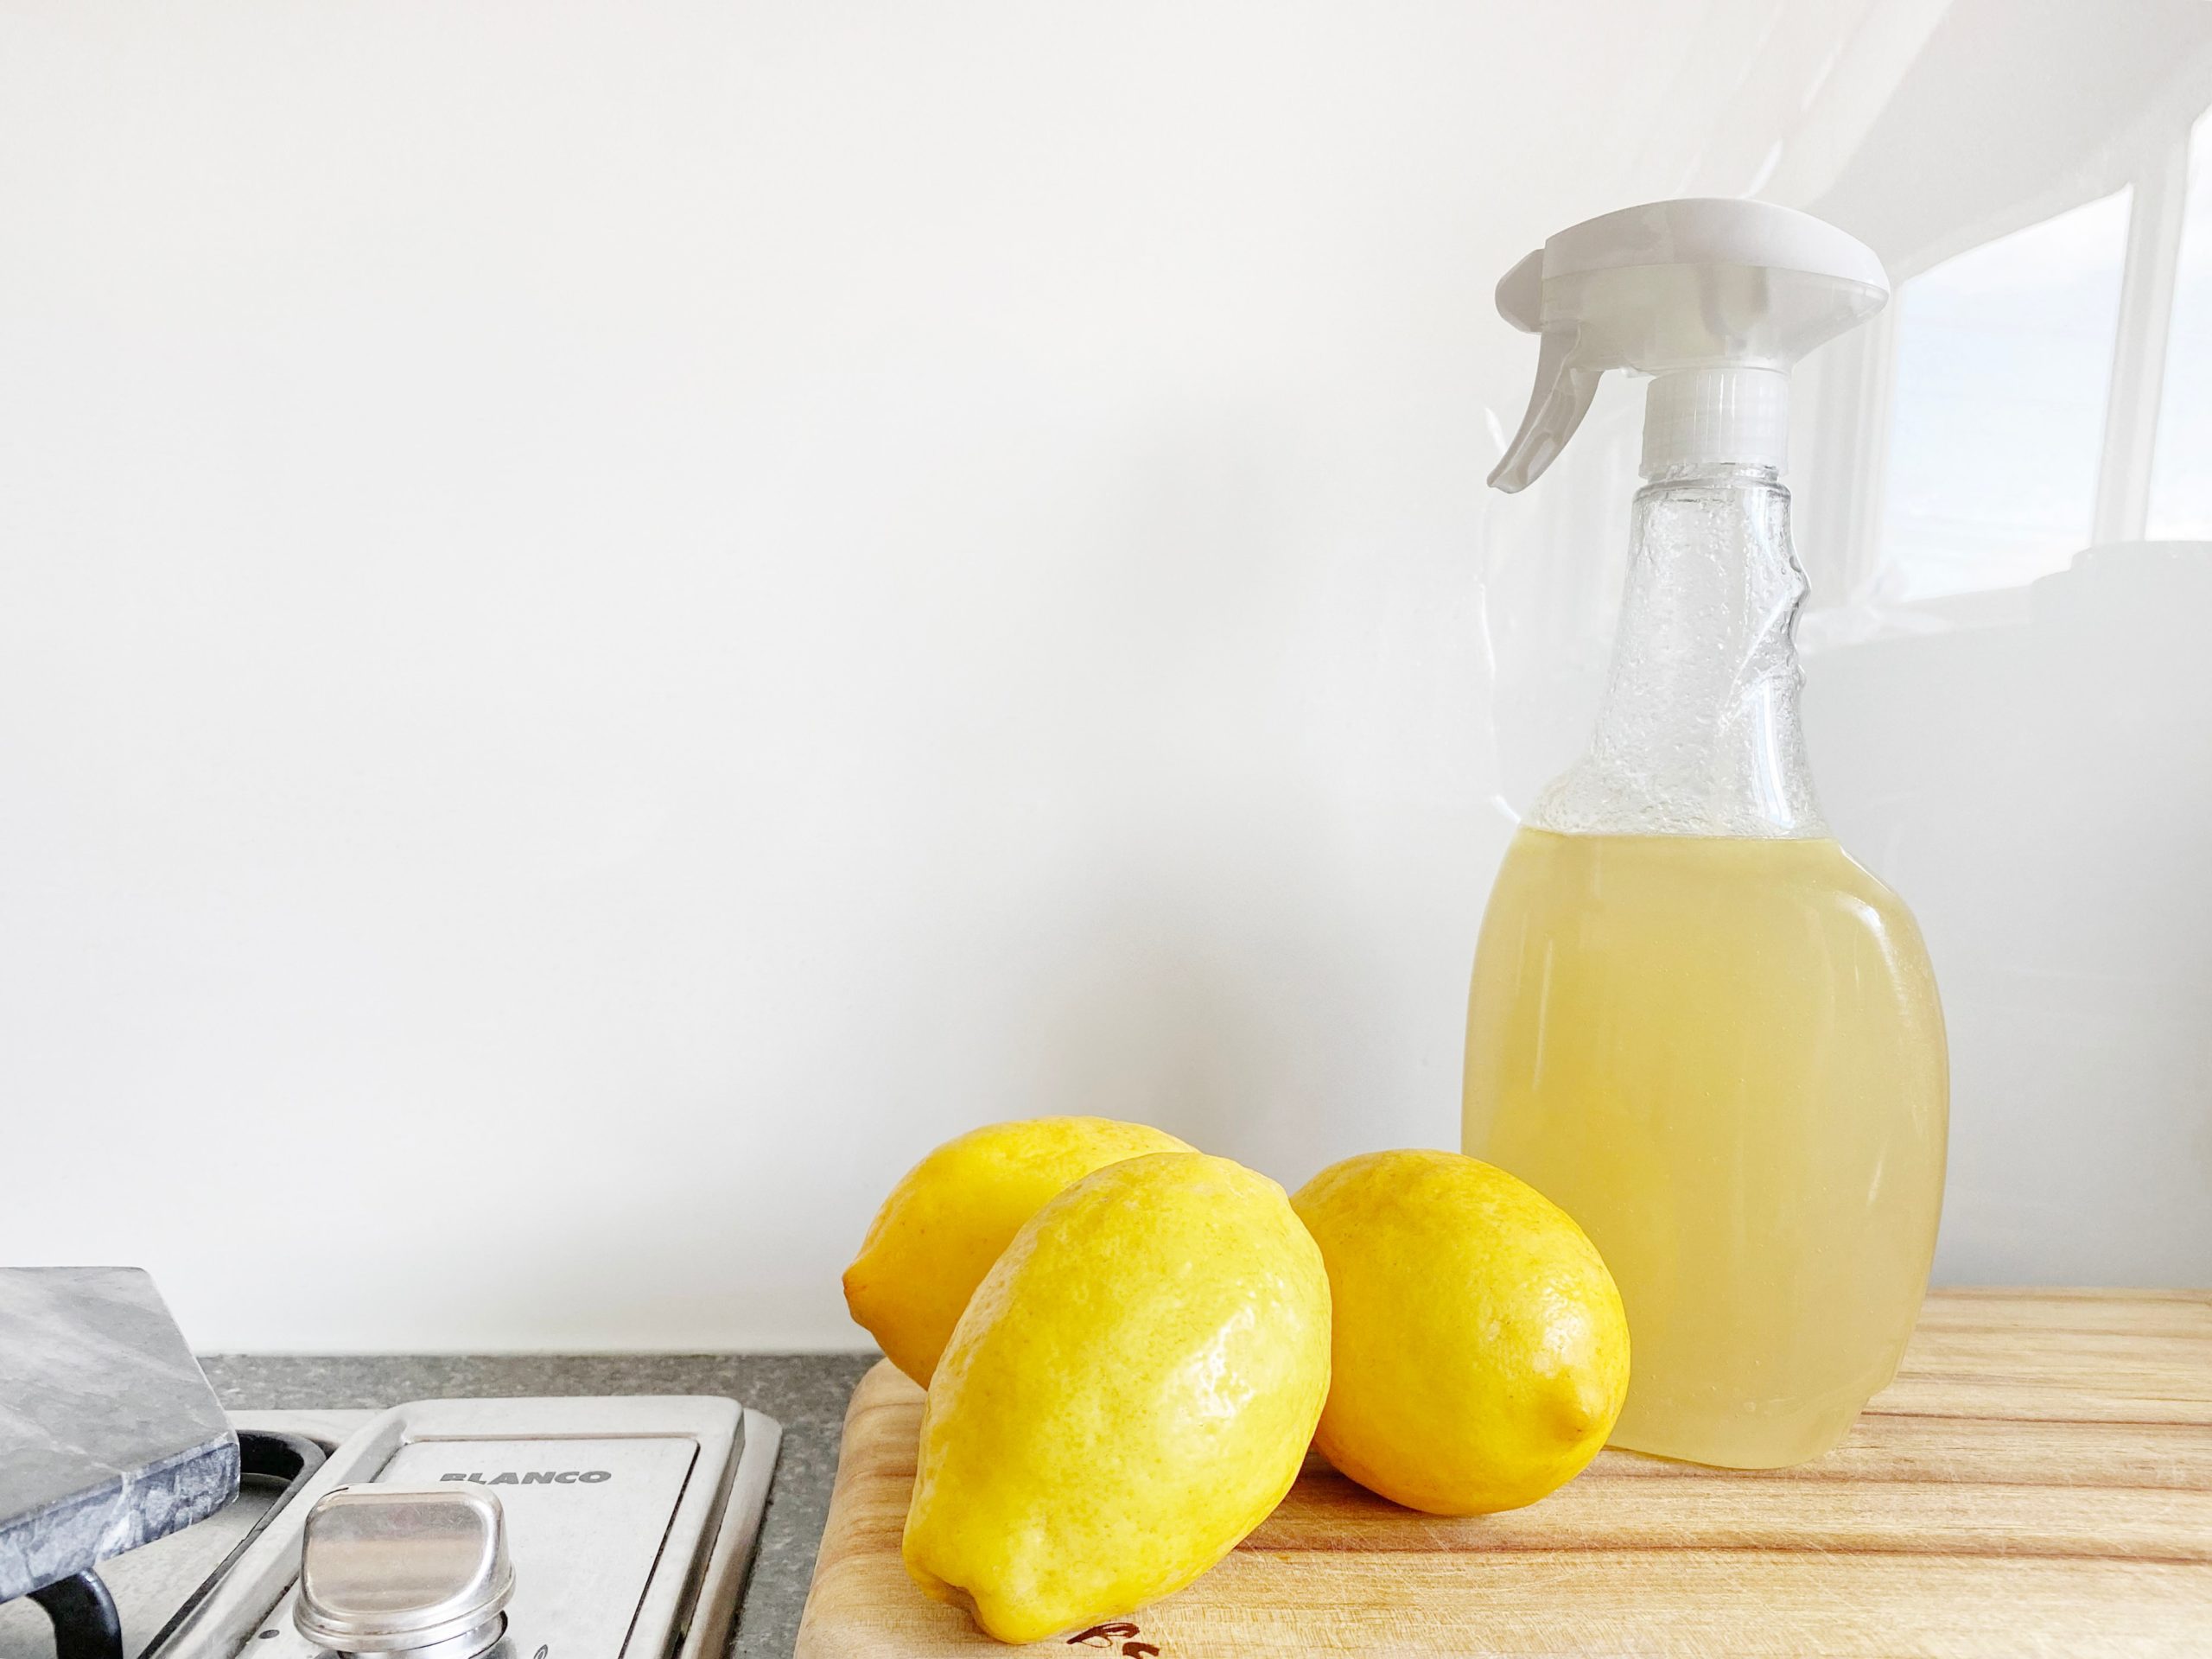 Three lemons and a bottle of cleaning solution sitting on a kitchen counter